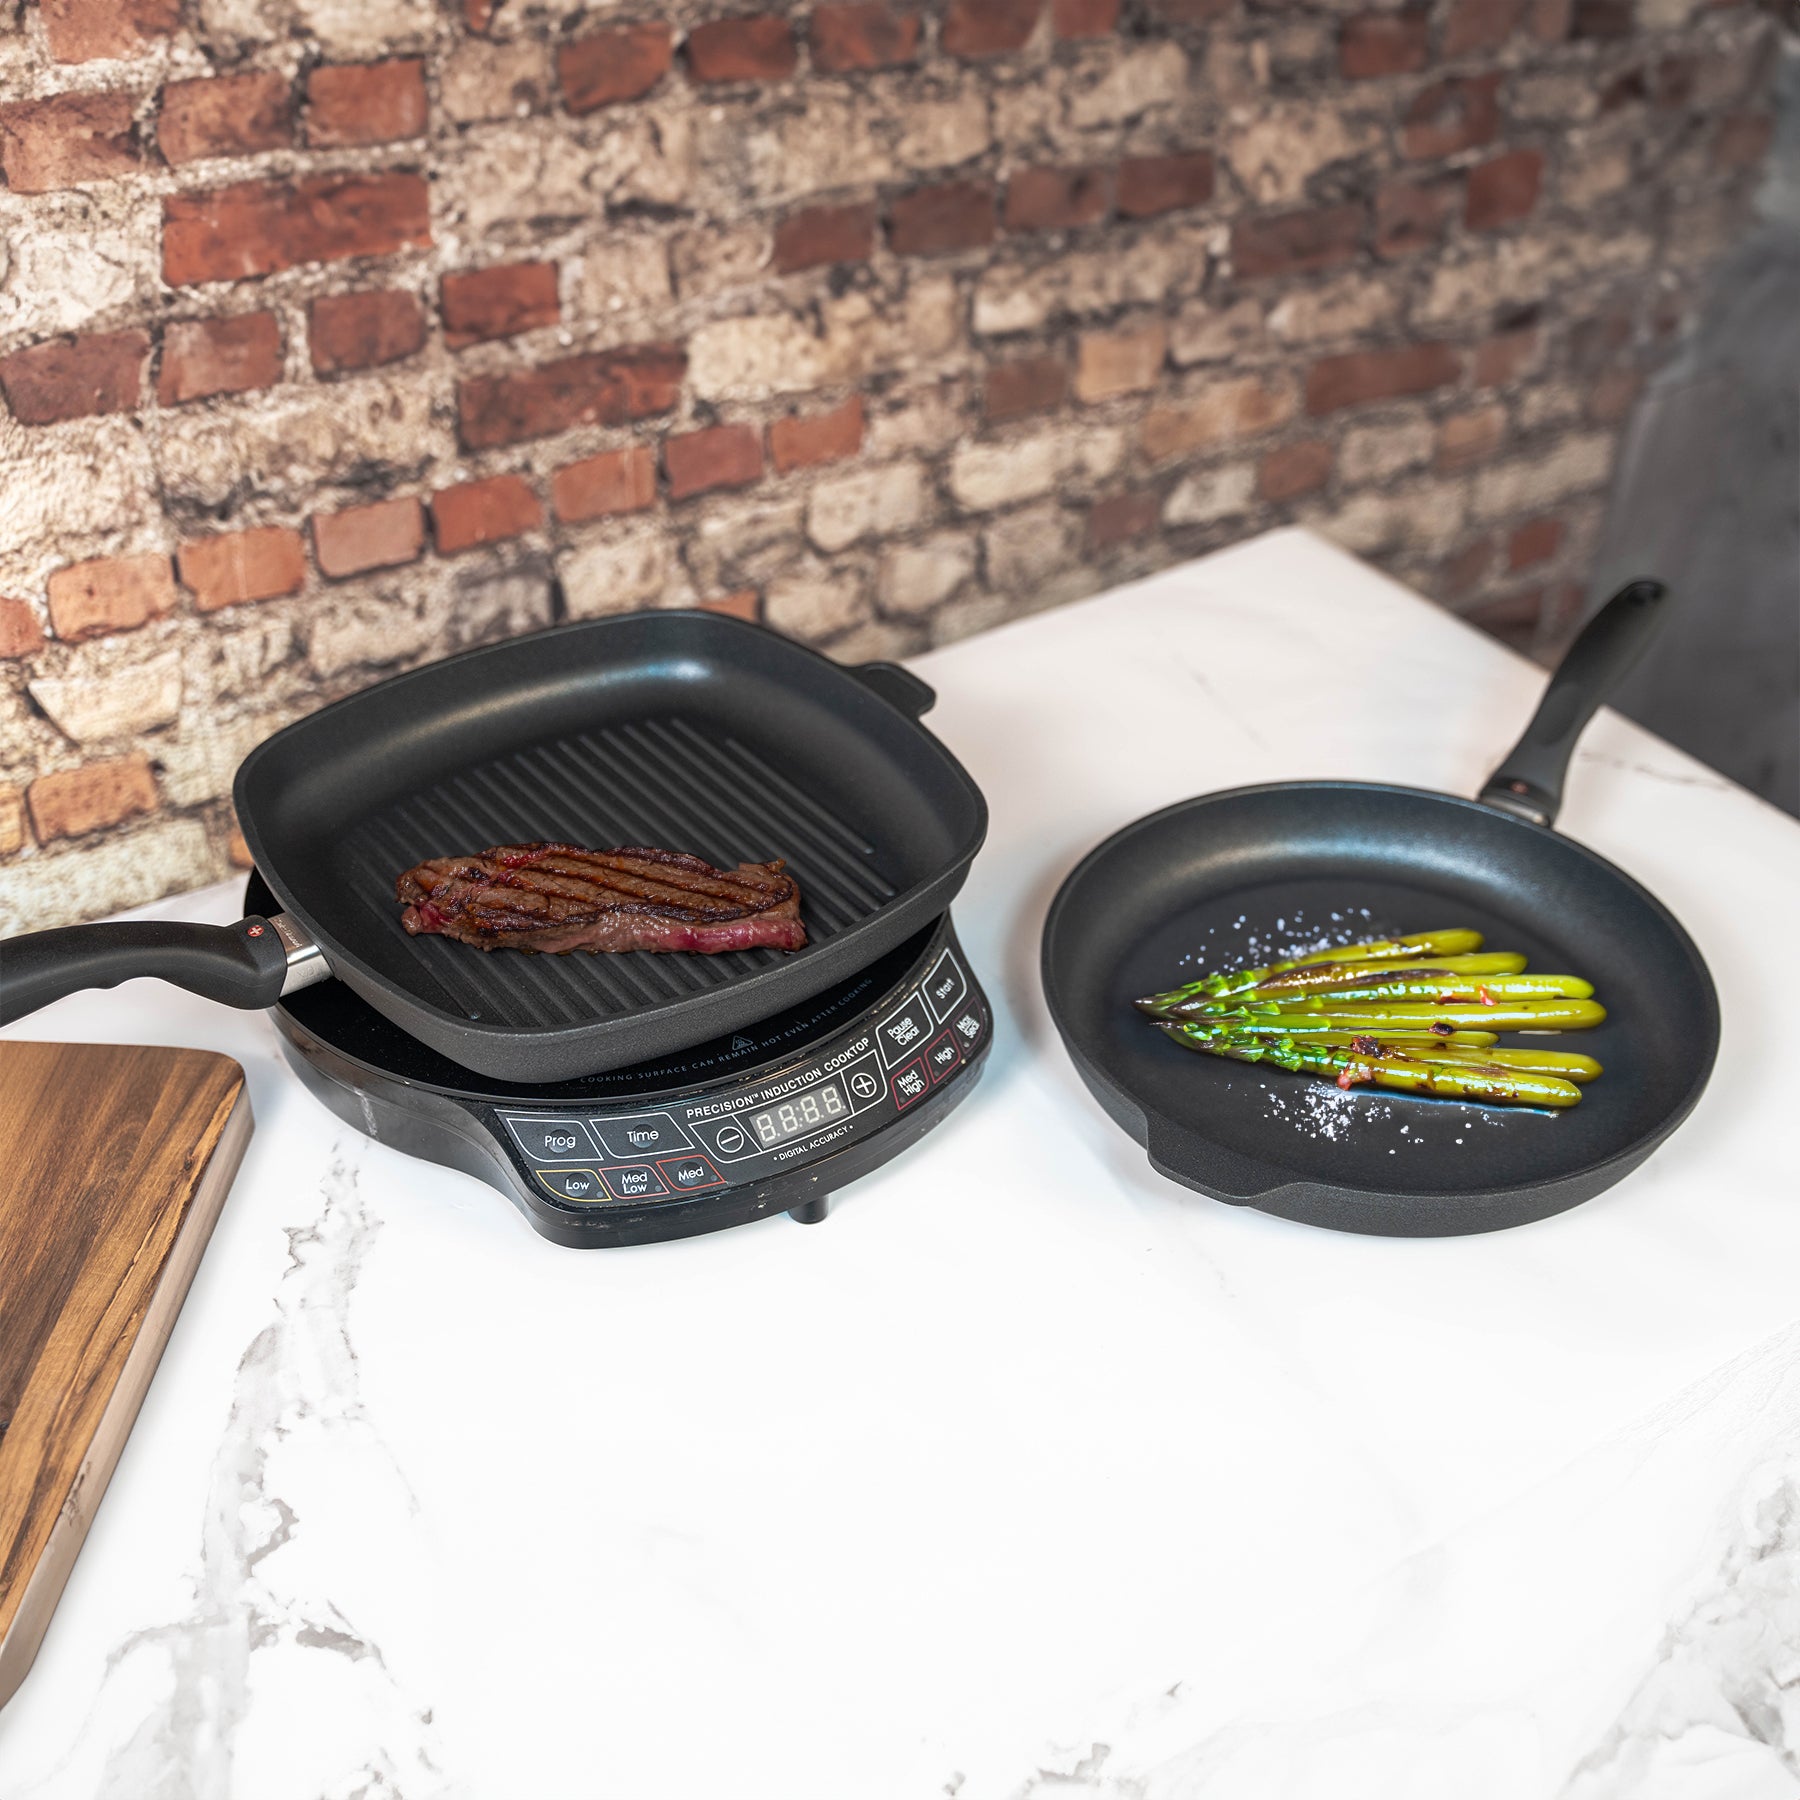 XD Nonstick 2-Piece Set - Fry Pan & Grill Pan - Induction in use with food on pans